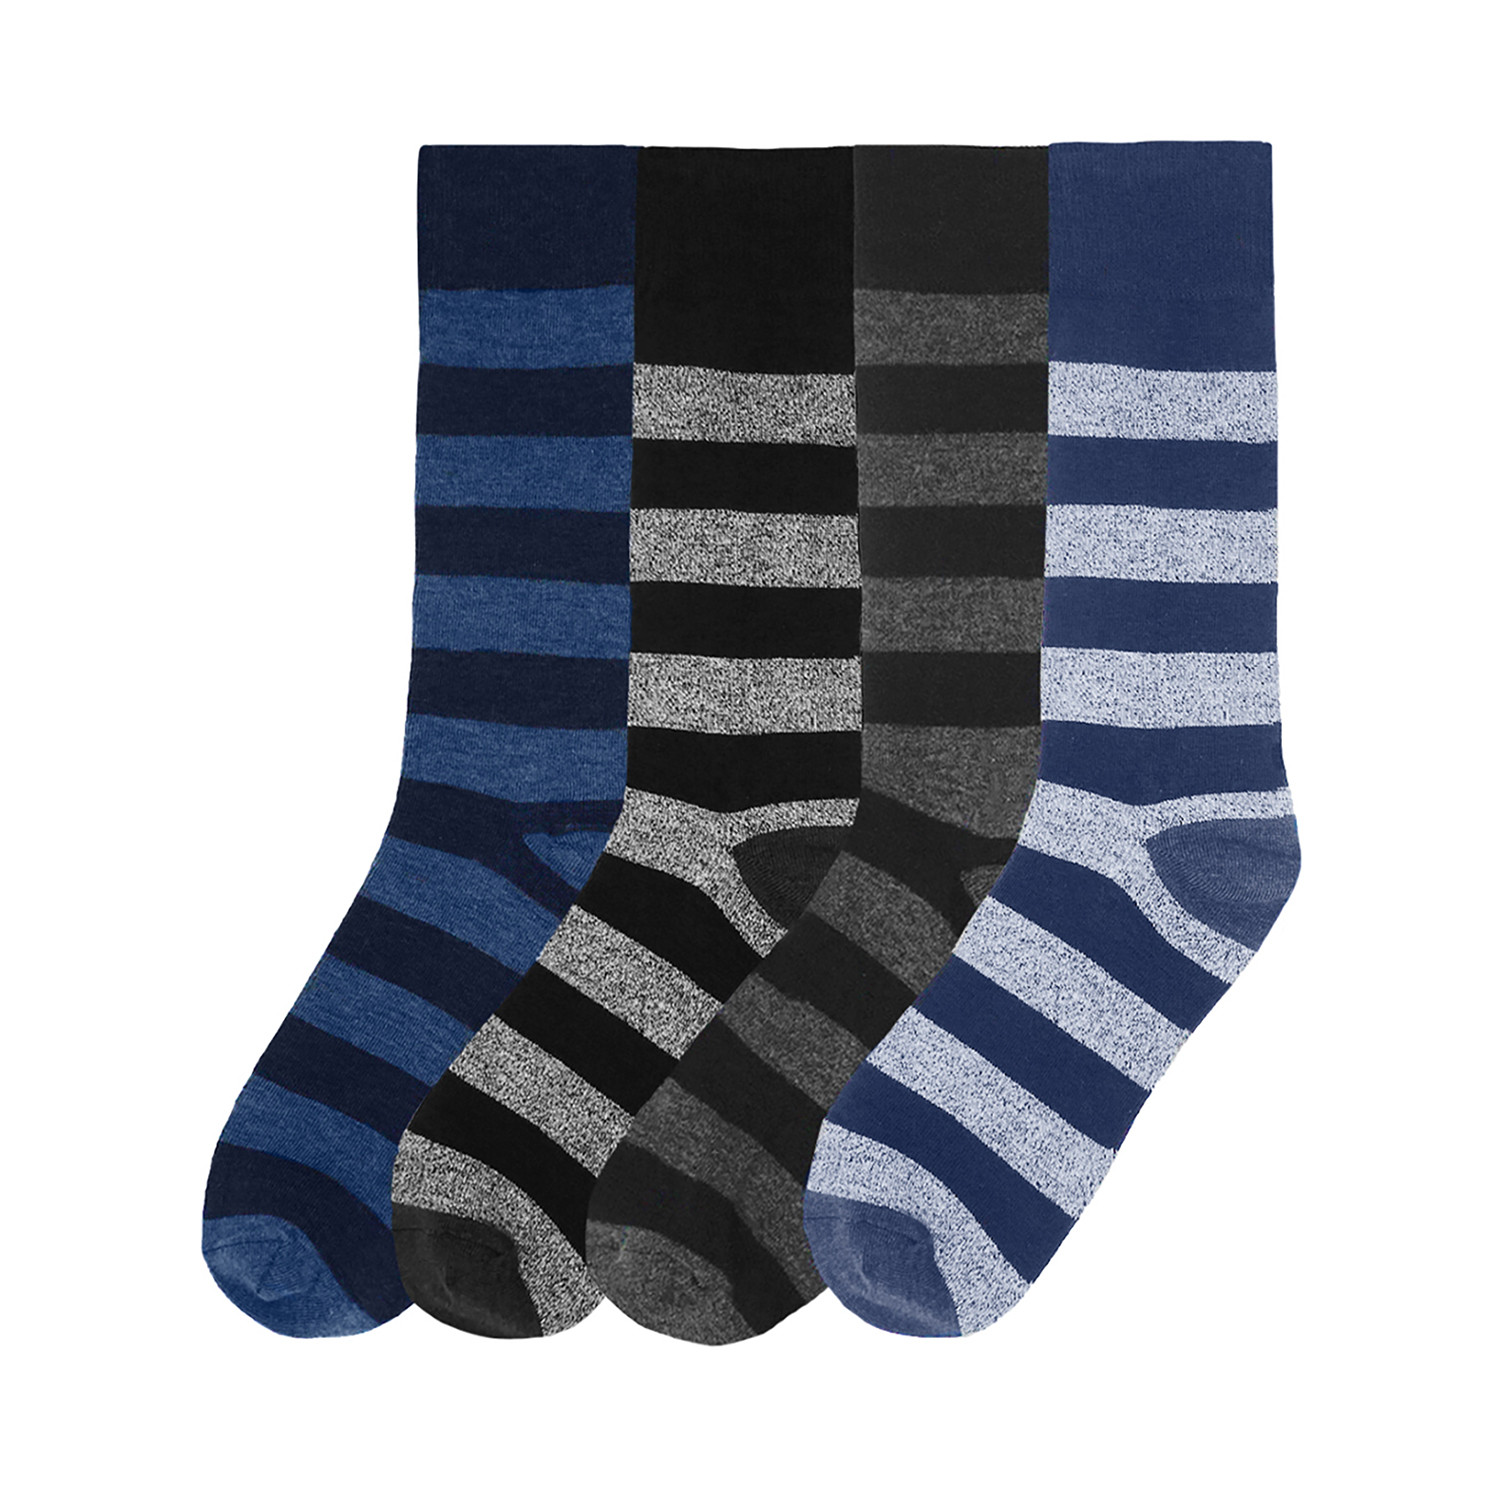 Melange Rugby Sock // Pack of 4 - Basic/Outfitters - Touch of Modern